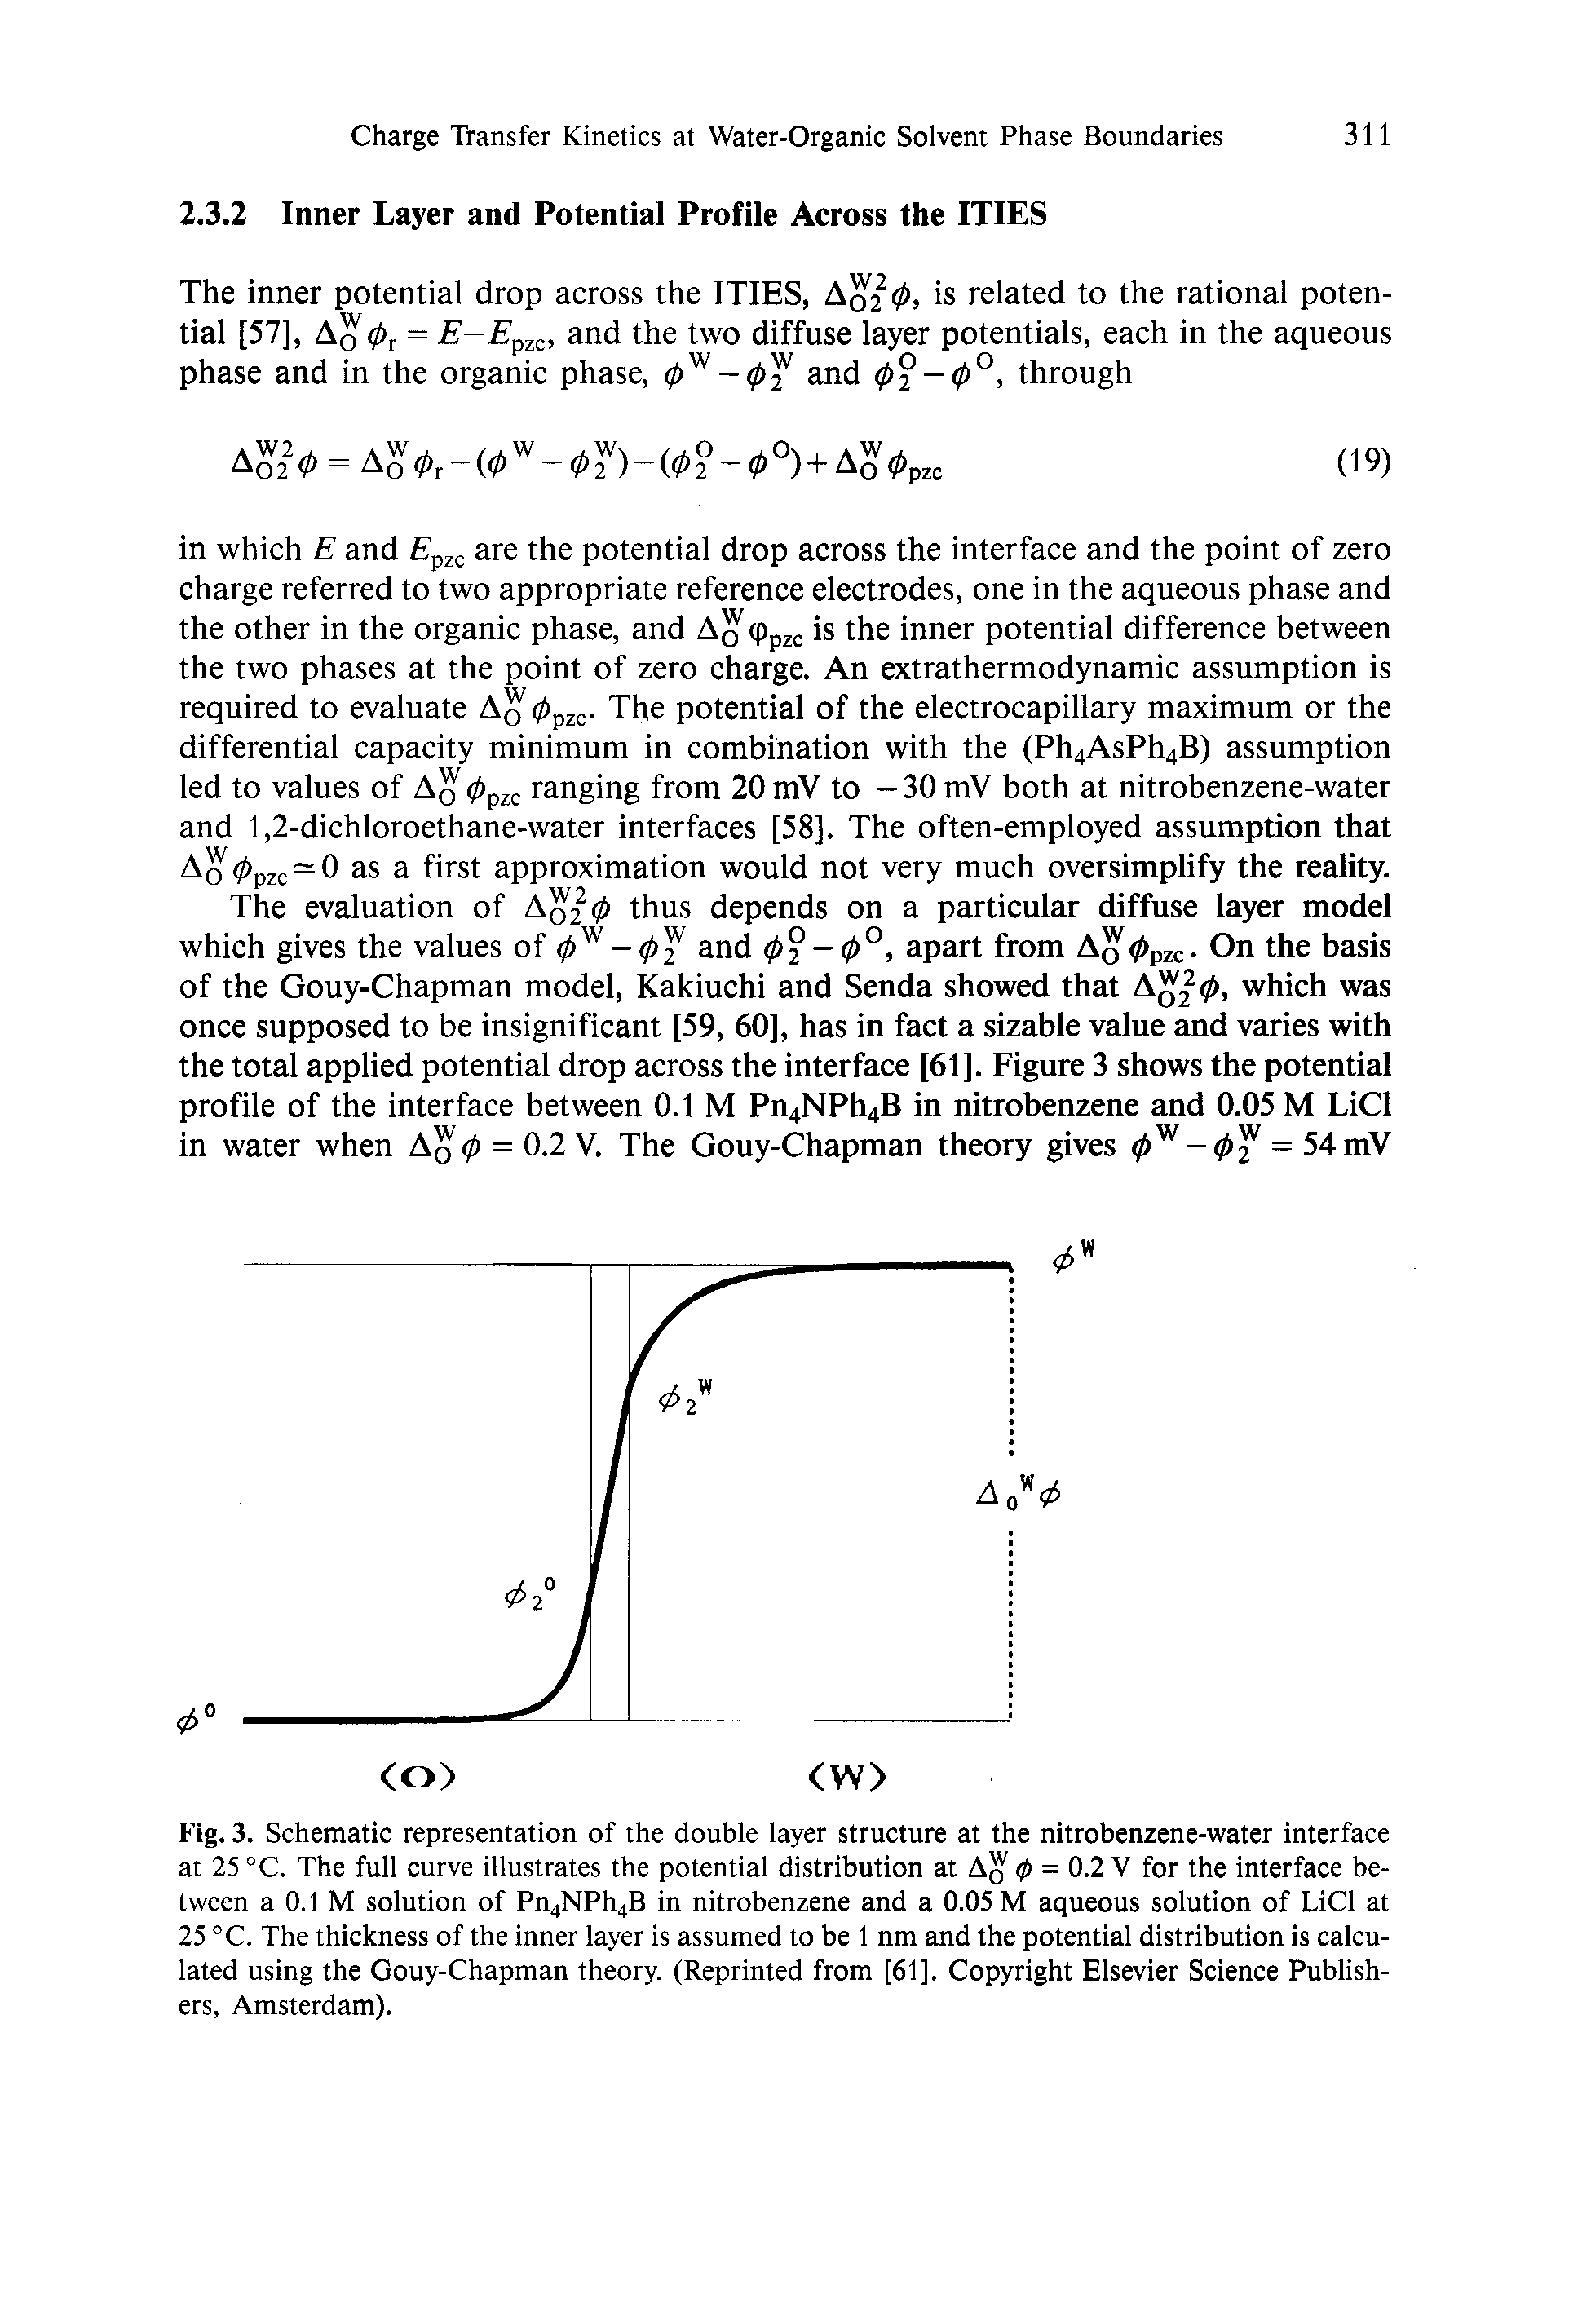 Fig. 3. Schematic representation of the double layer structure at the nitrobenzene-water interface at 25 C. The full curve illustrates the potential distribution at Aq 0 = 0.2 V for the interface between a 0.1 M solution of Pn4NPh4B in nitrobenzene and a 0.05 M aqueous solution of LiCl at 25 °C. The thickness of the inner layer is assumed to be 1 nm and the potential distribution is calculated using the Gouy-Chapman theory. (Reprinted from [61]. Copyright Elsevier Seience Publishers, Amsterdam).